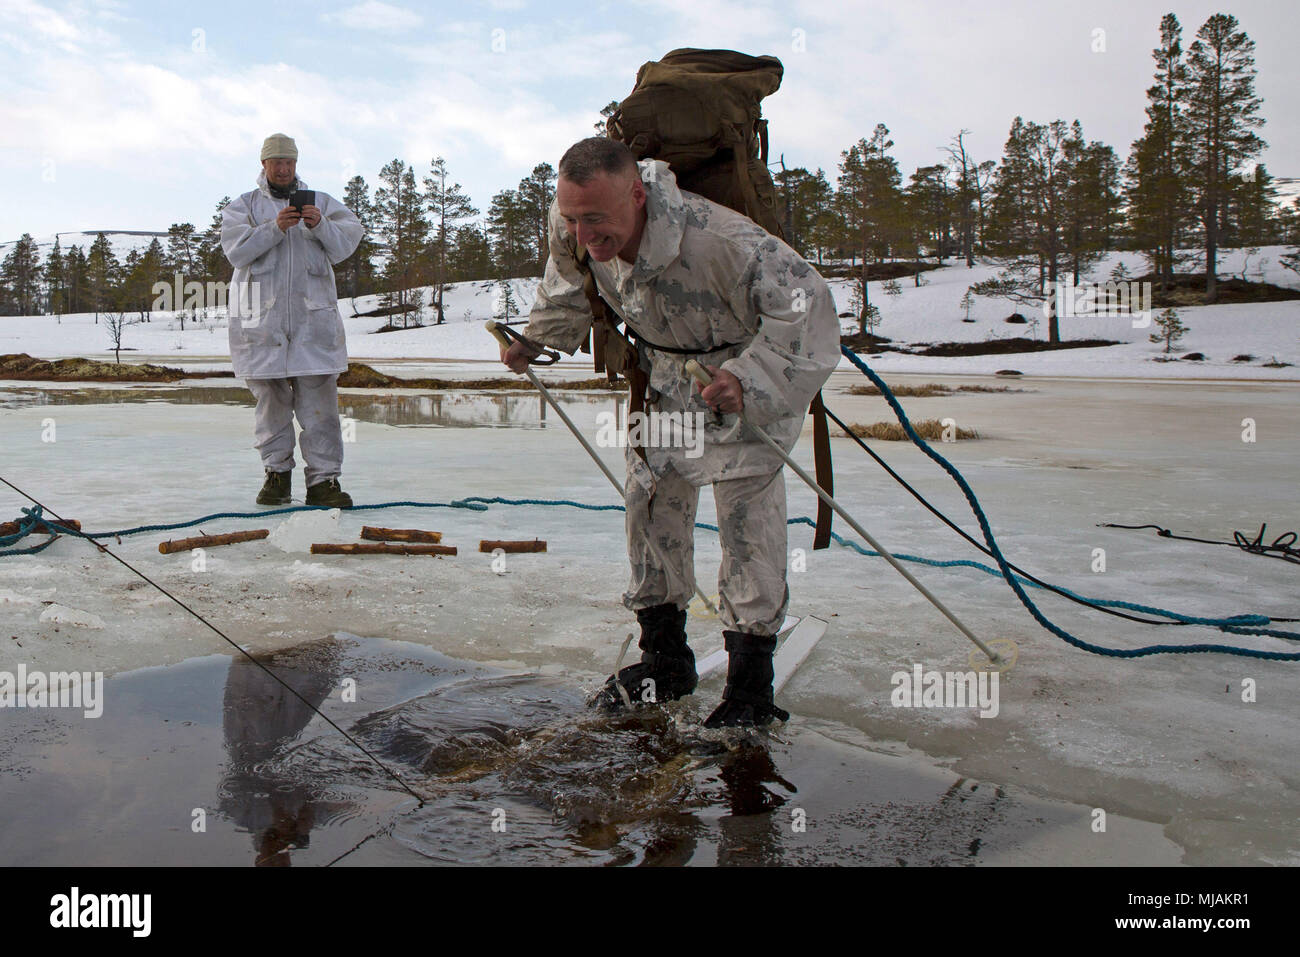 Black Sea Rotational Force and Marine Rotational Force-Europe 18.1 Commanding Officer Lt. Col. G. P. Gordon prepares to be the first individual from his unit to complete the polar plunge during a winter warfare training exercise at Haltdalen Training Center, Norway, April 20, 2018. More than 70 Marines and Sailors spent three weeks in the Norwegian wilderness learning cold weather survival techniques, which were taught by Norwegian Soldiers with Home Guard 12. Marines and Sailors who participated in the polar plunge learned how to properly retain their gear and escape after falling through the Stock Photo